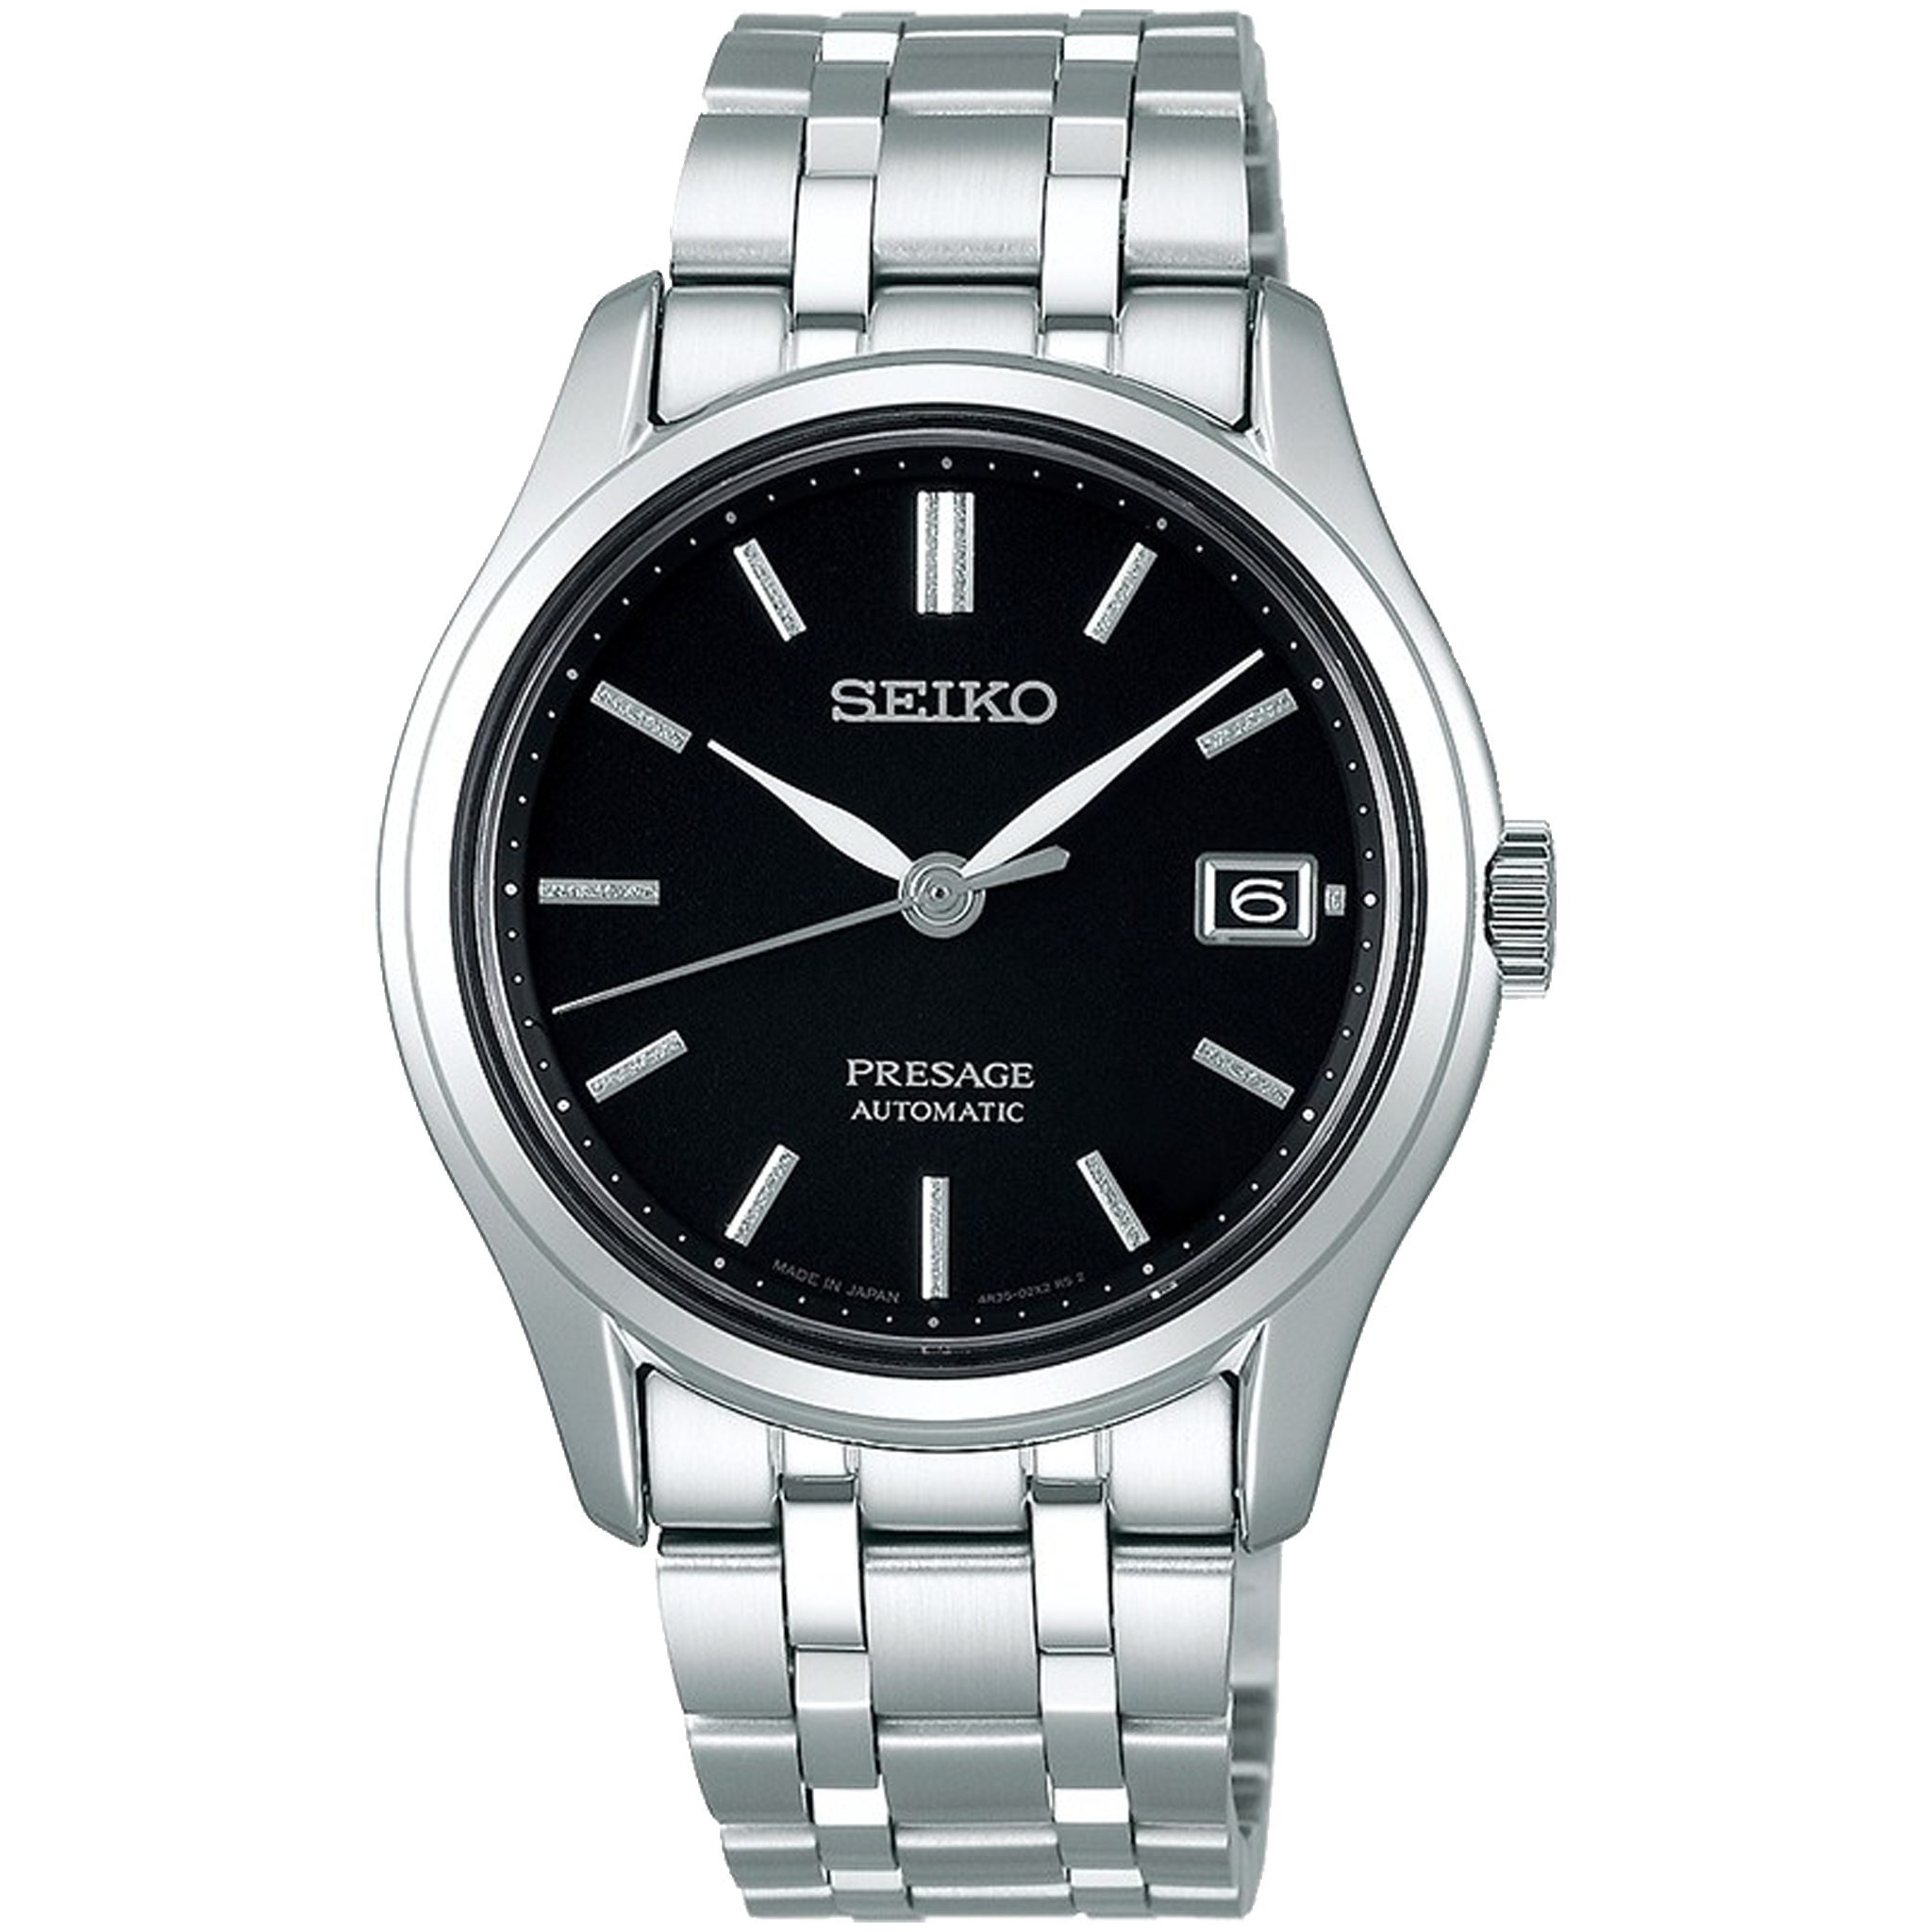 Seiko Presage Automatic - Stainless Steel SRPD99J1